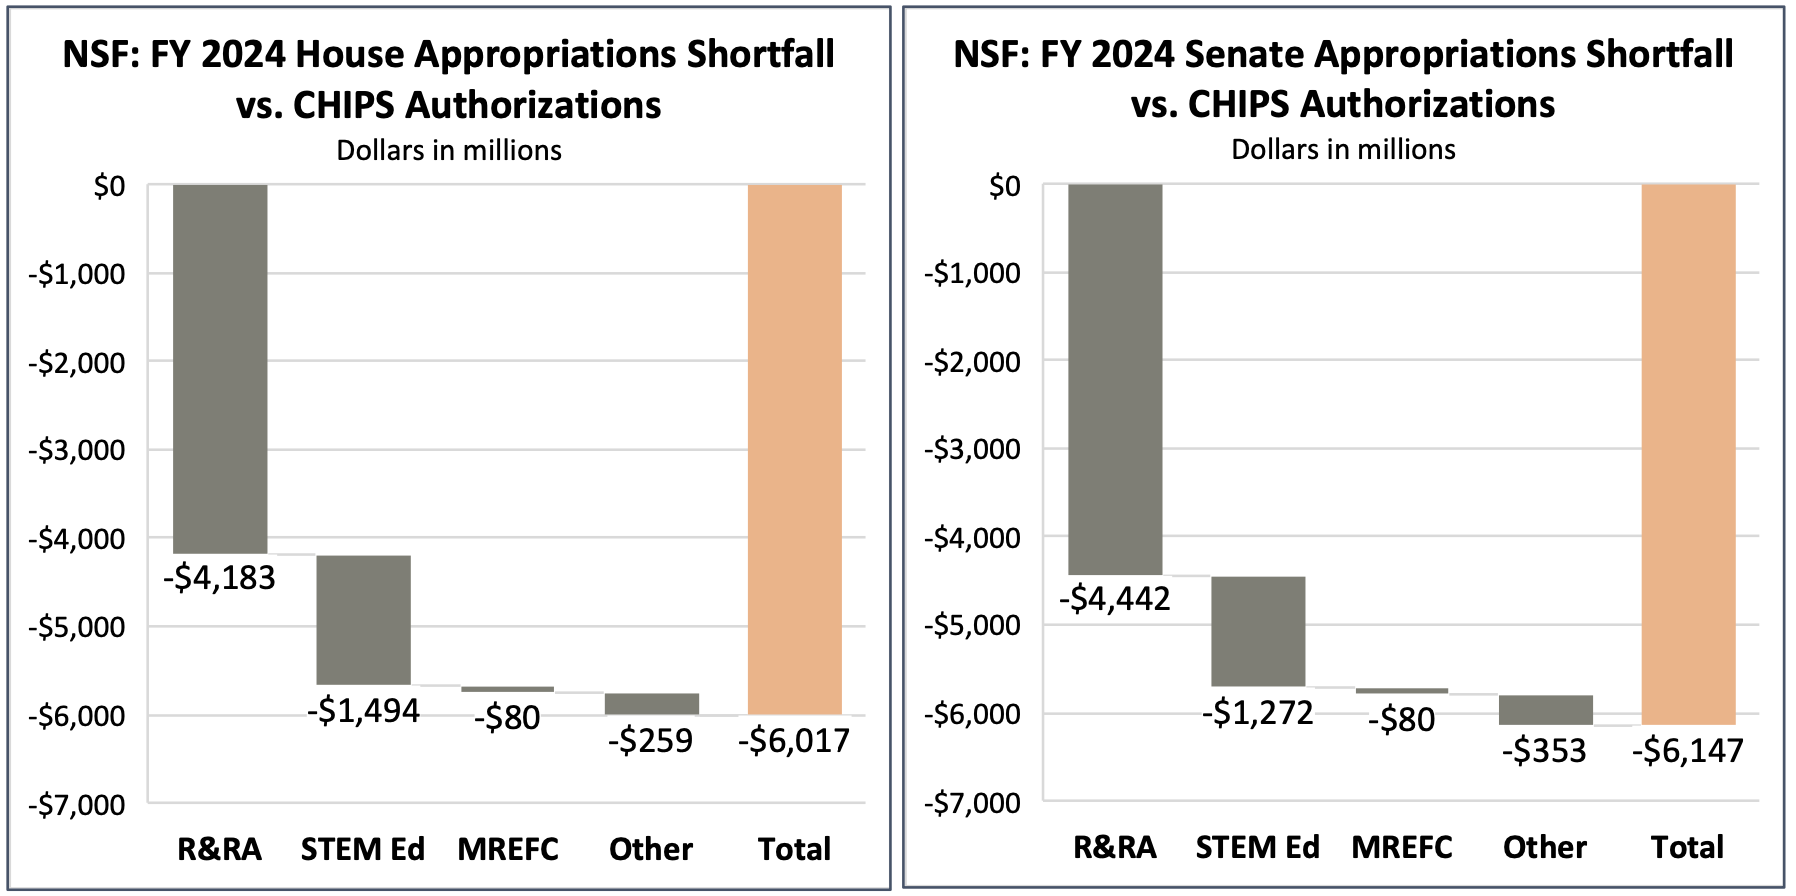 In both the House and the Senate, FY24 Appropriations fall far short of CHIPS authorizations across research and education accounts.